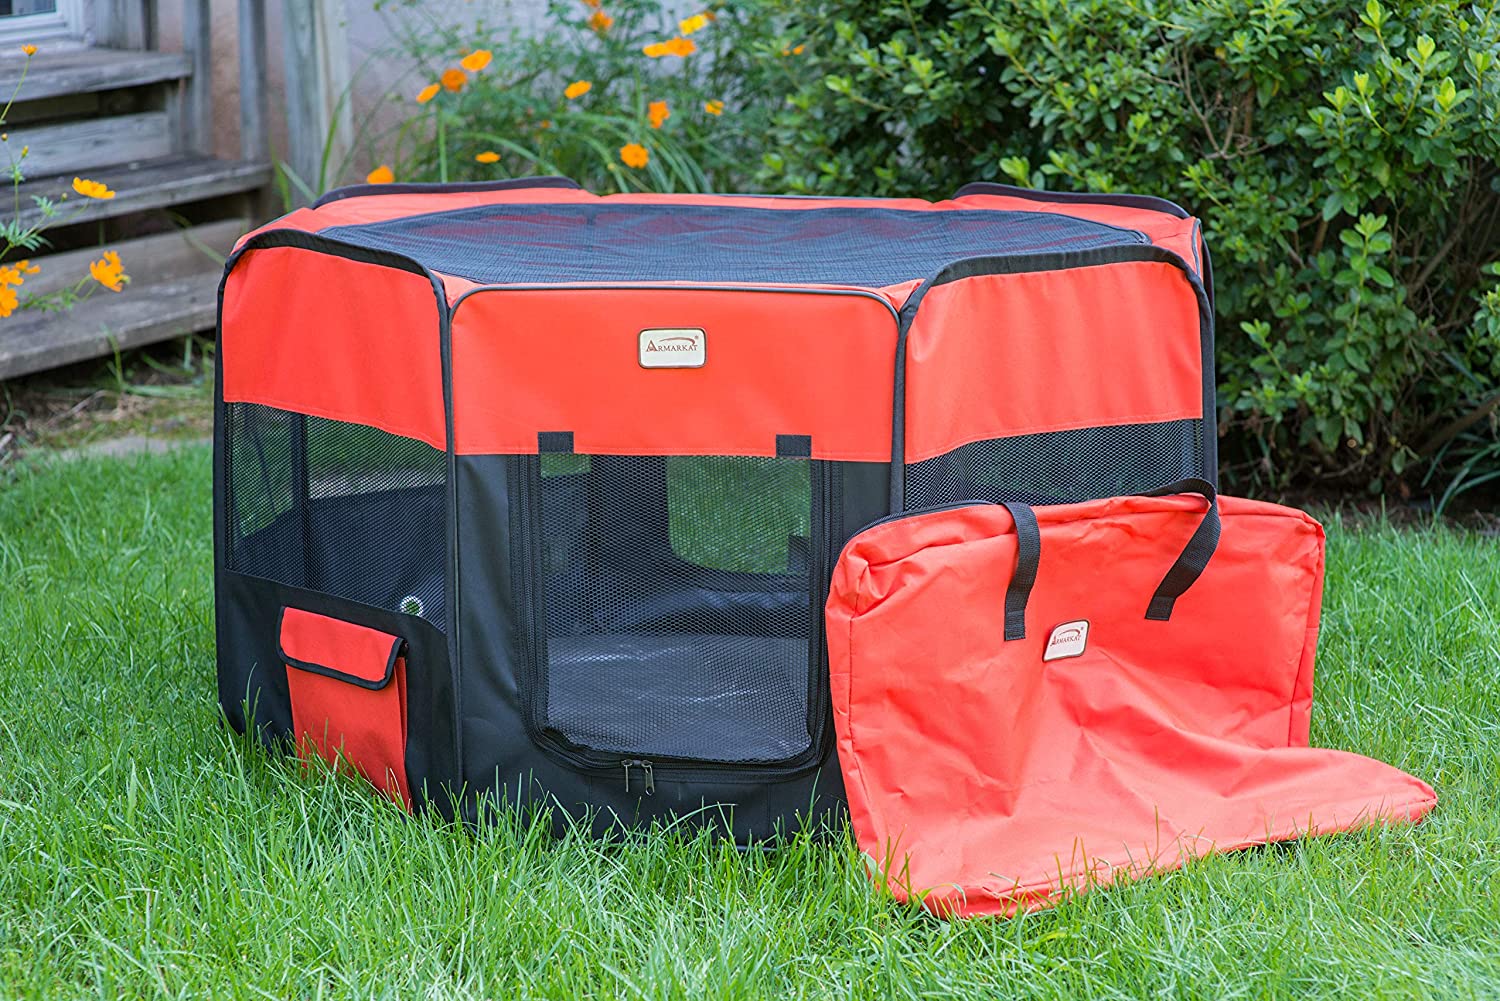 Armarkat Model PP002R-XL Portable Pet Playpen in Black and Red Combo, XL